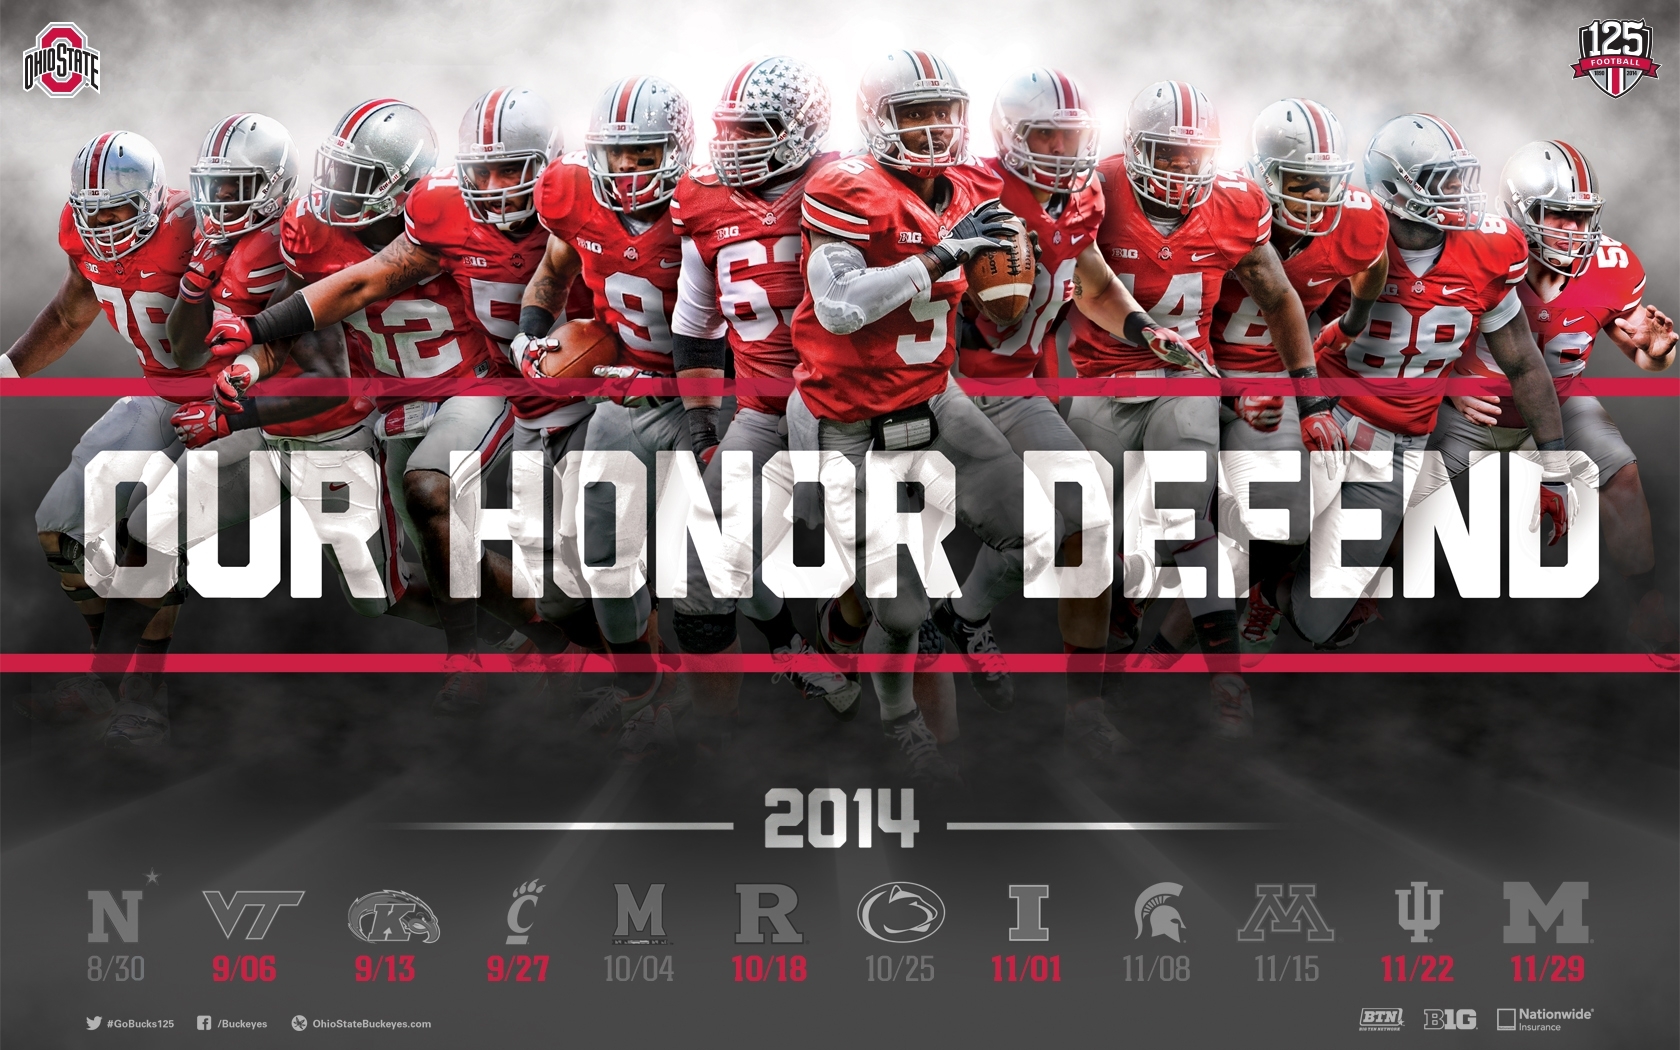 download the ohio state football 2014 schedule poster for printing